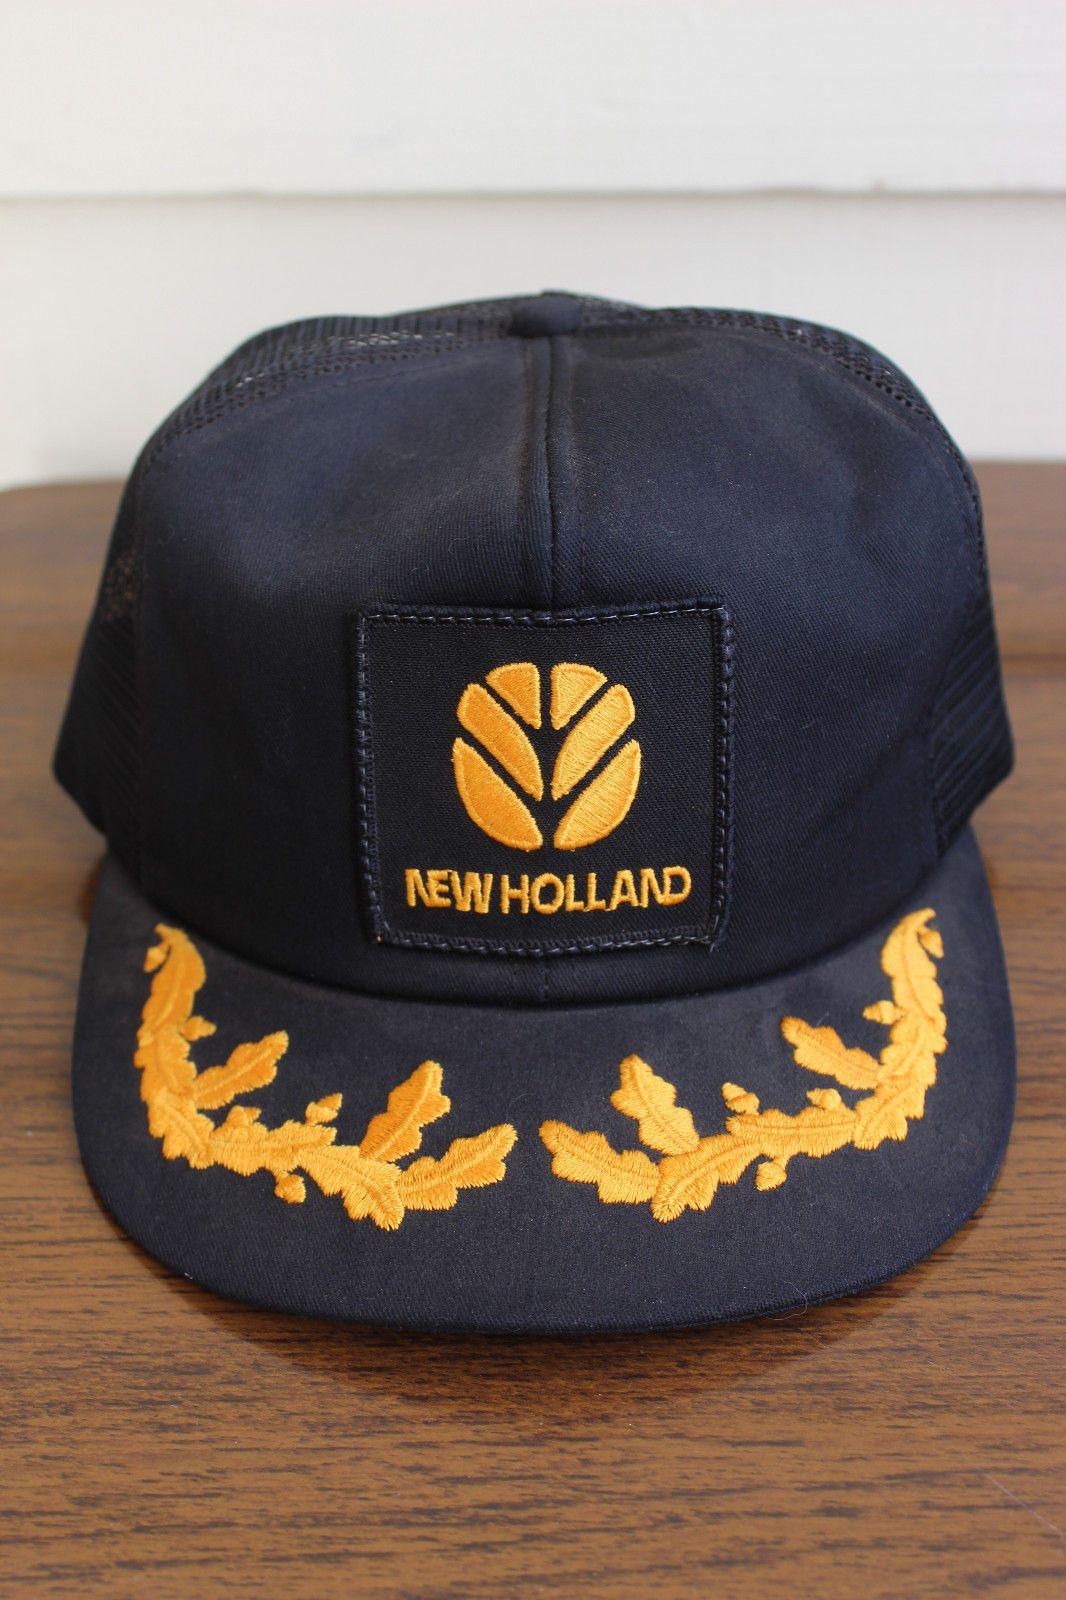 Vintage New Holland Logo - Donald Trump Schedule and Appearances | Eventful